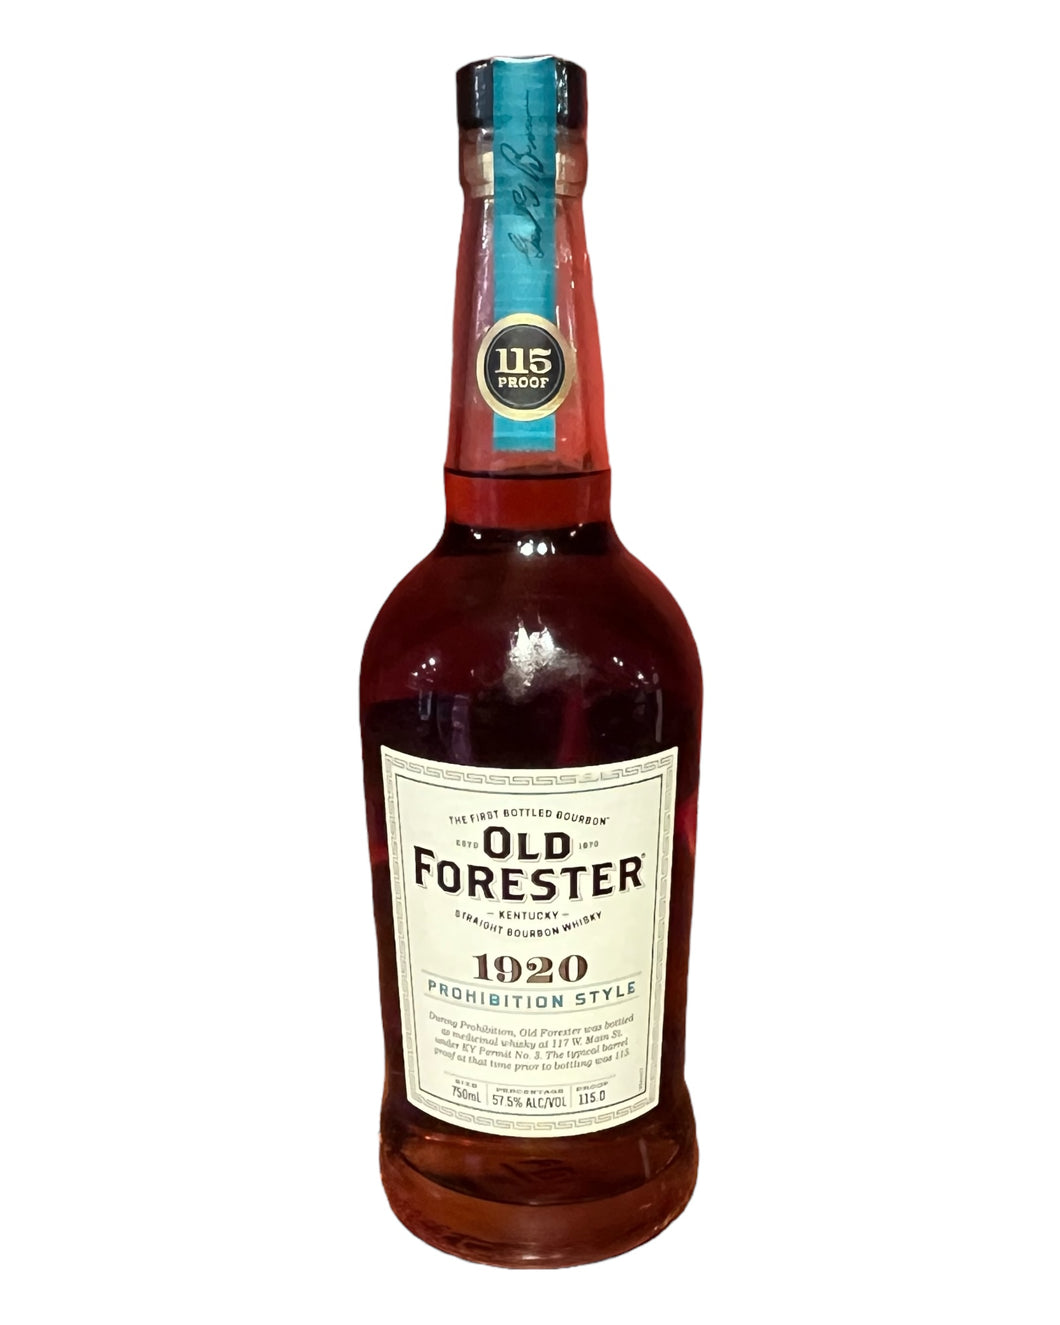 OLD FORESTER 1920